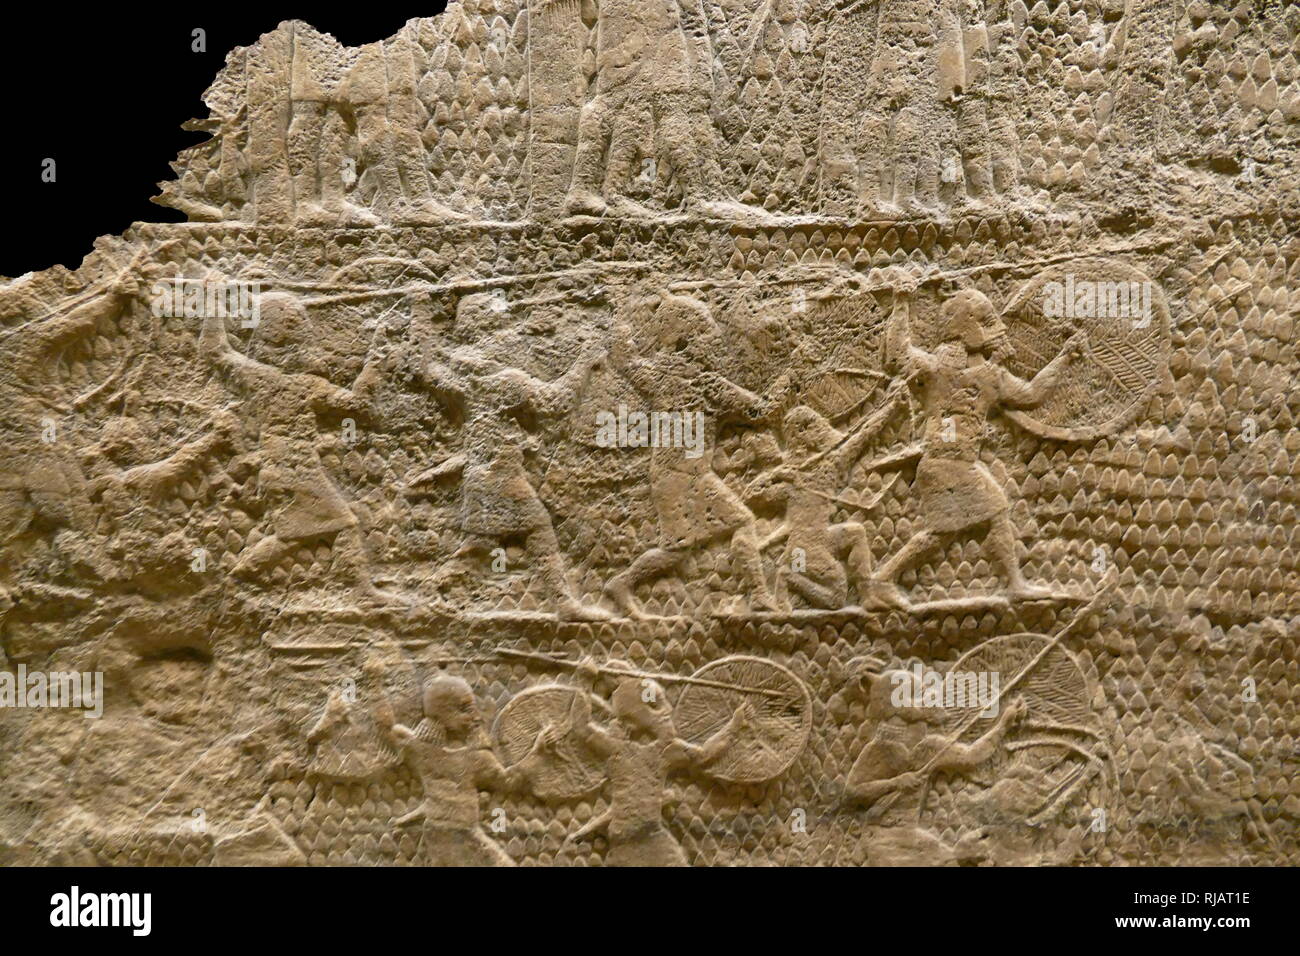 Stone carved relief depicting an attack on Lachish. Assyrian, about 700-692 ВС. From Nineveh, South-West Palace, Room XXXVI, panels 5-6. These panels, show an important incident during Sennacherib's campaign of 701 BC, the capture of Lachish in the kingdom of Judah. artillery hurl stones and archers are shooting arrows, as troops prepare for the assault. Stock Photo